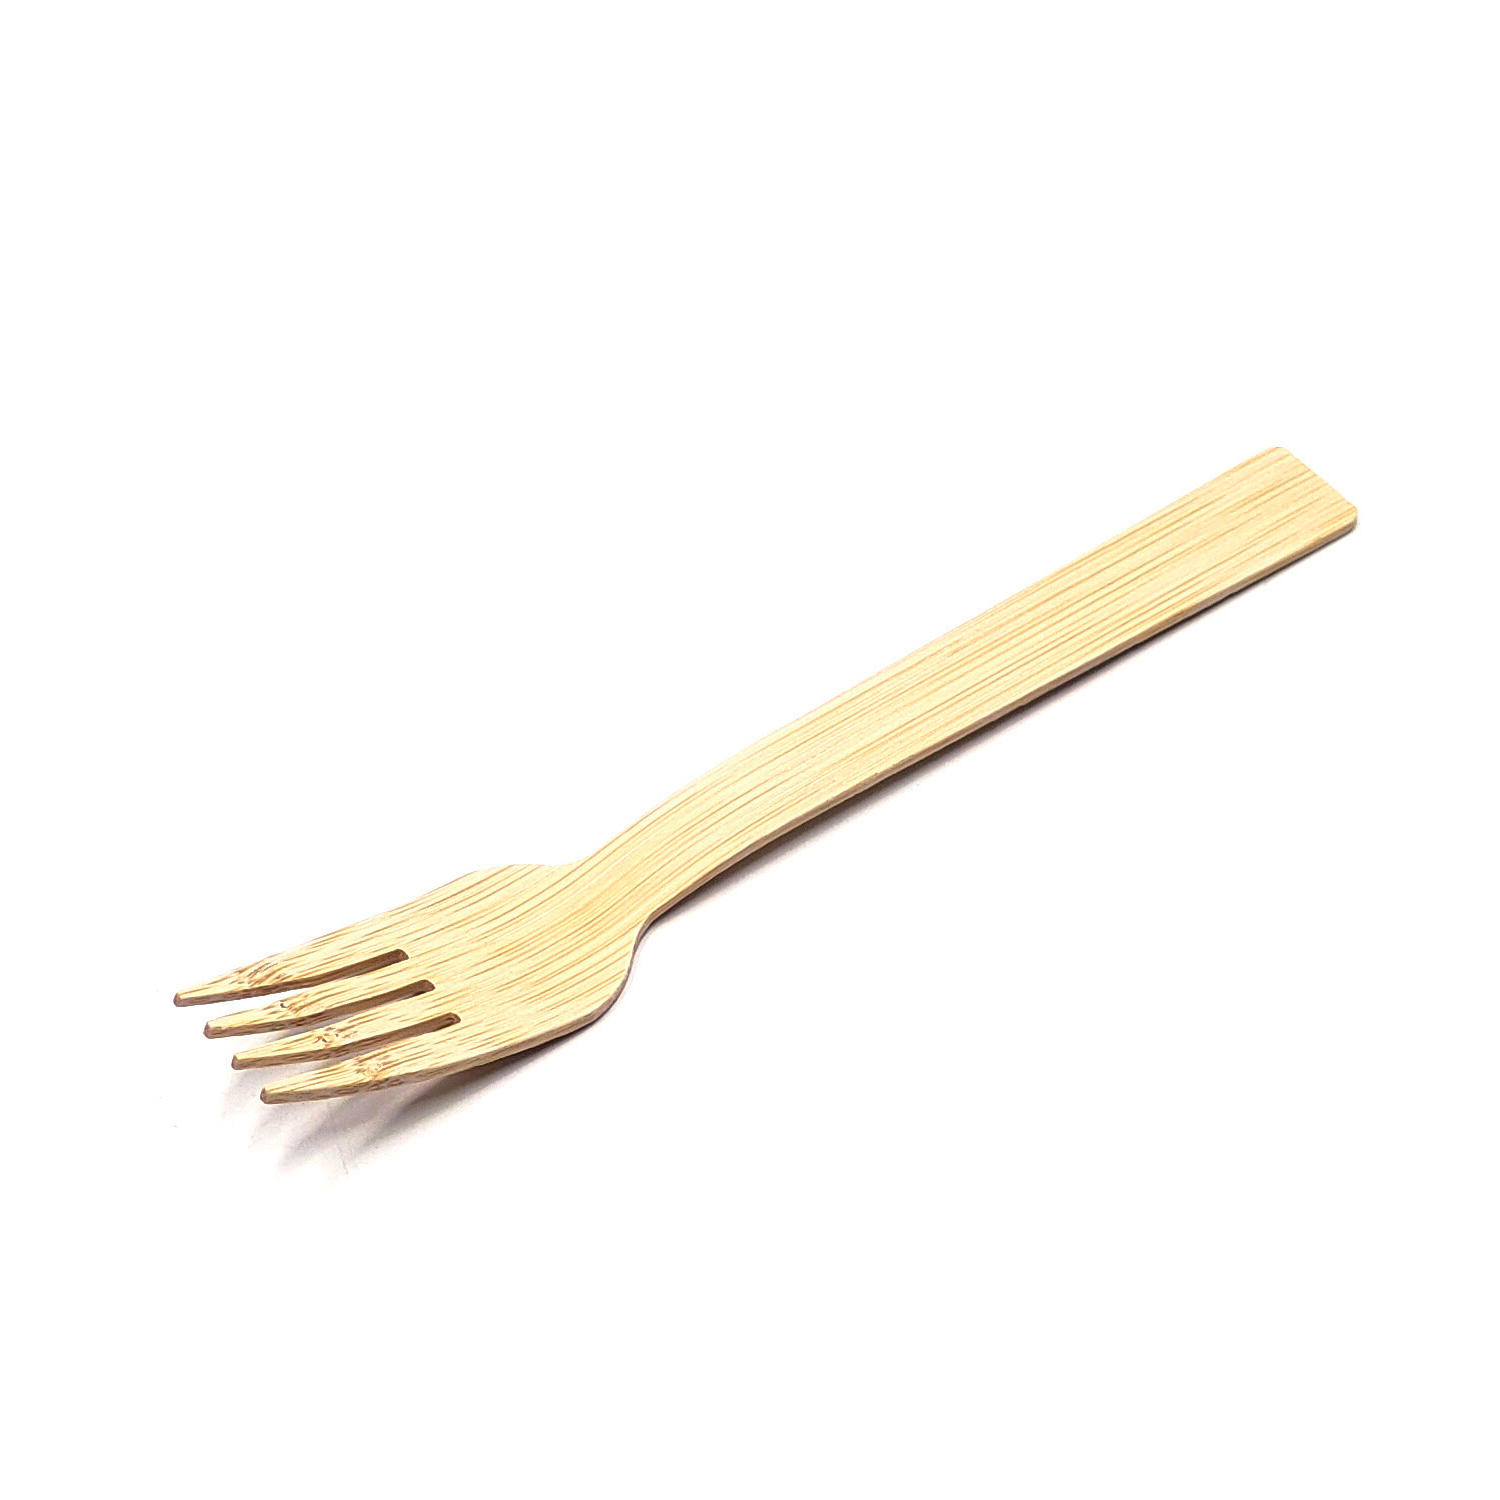 Top Disposable Cutlery Options for Weddings